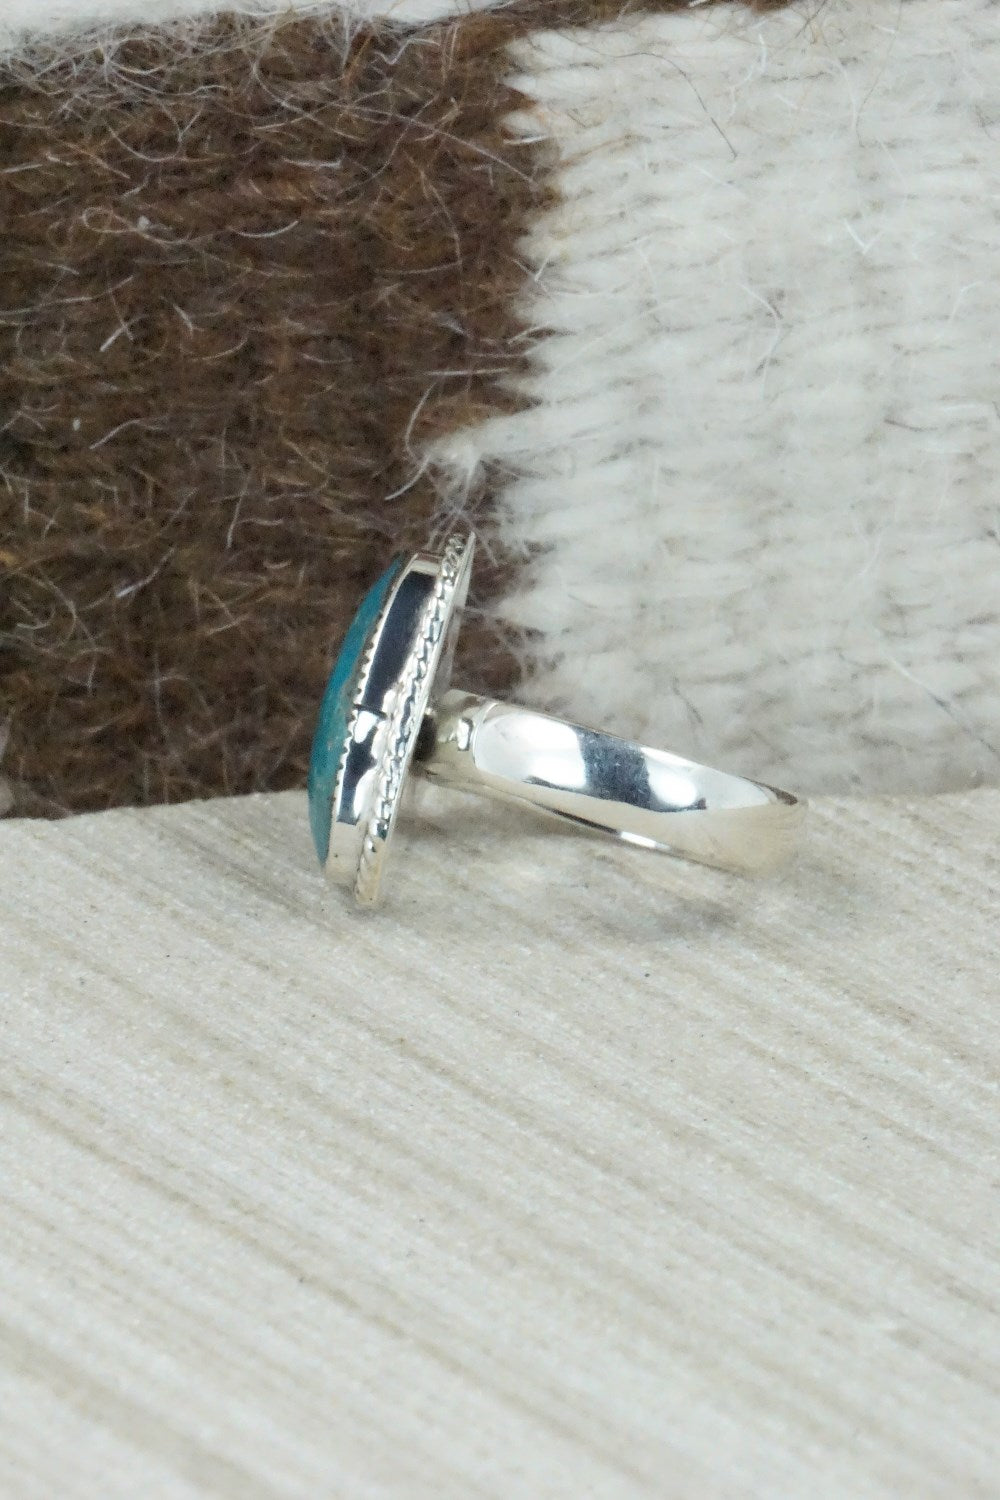 Turquoise & Sterling Silver Ring - Sheena Jack - Size 6.25